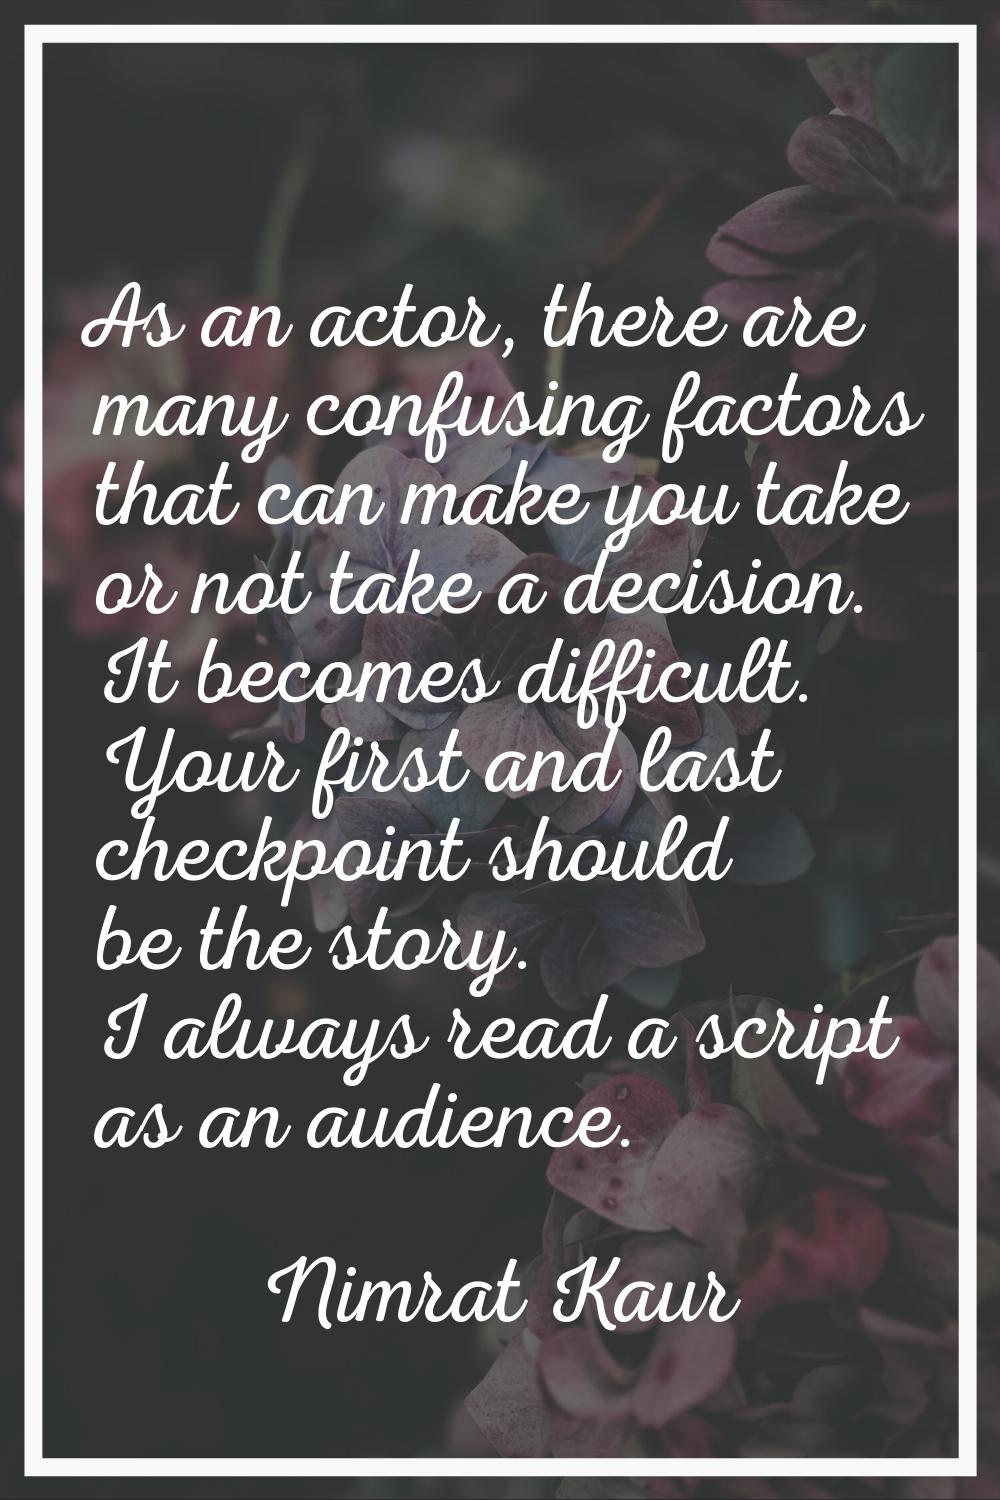 As an actor, there are many confusing factors that can make you take or not take a decision. It bec